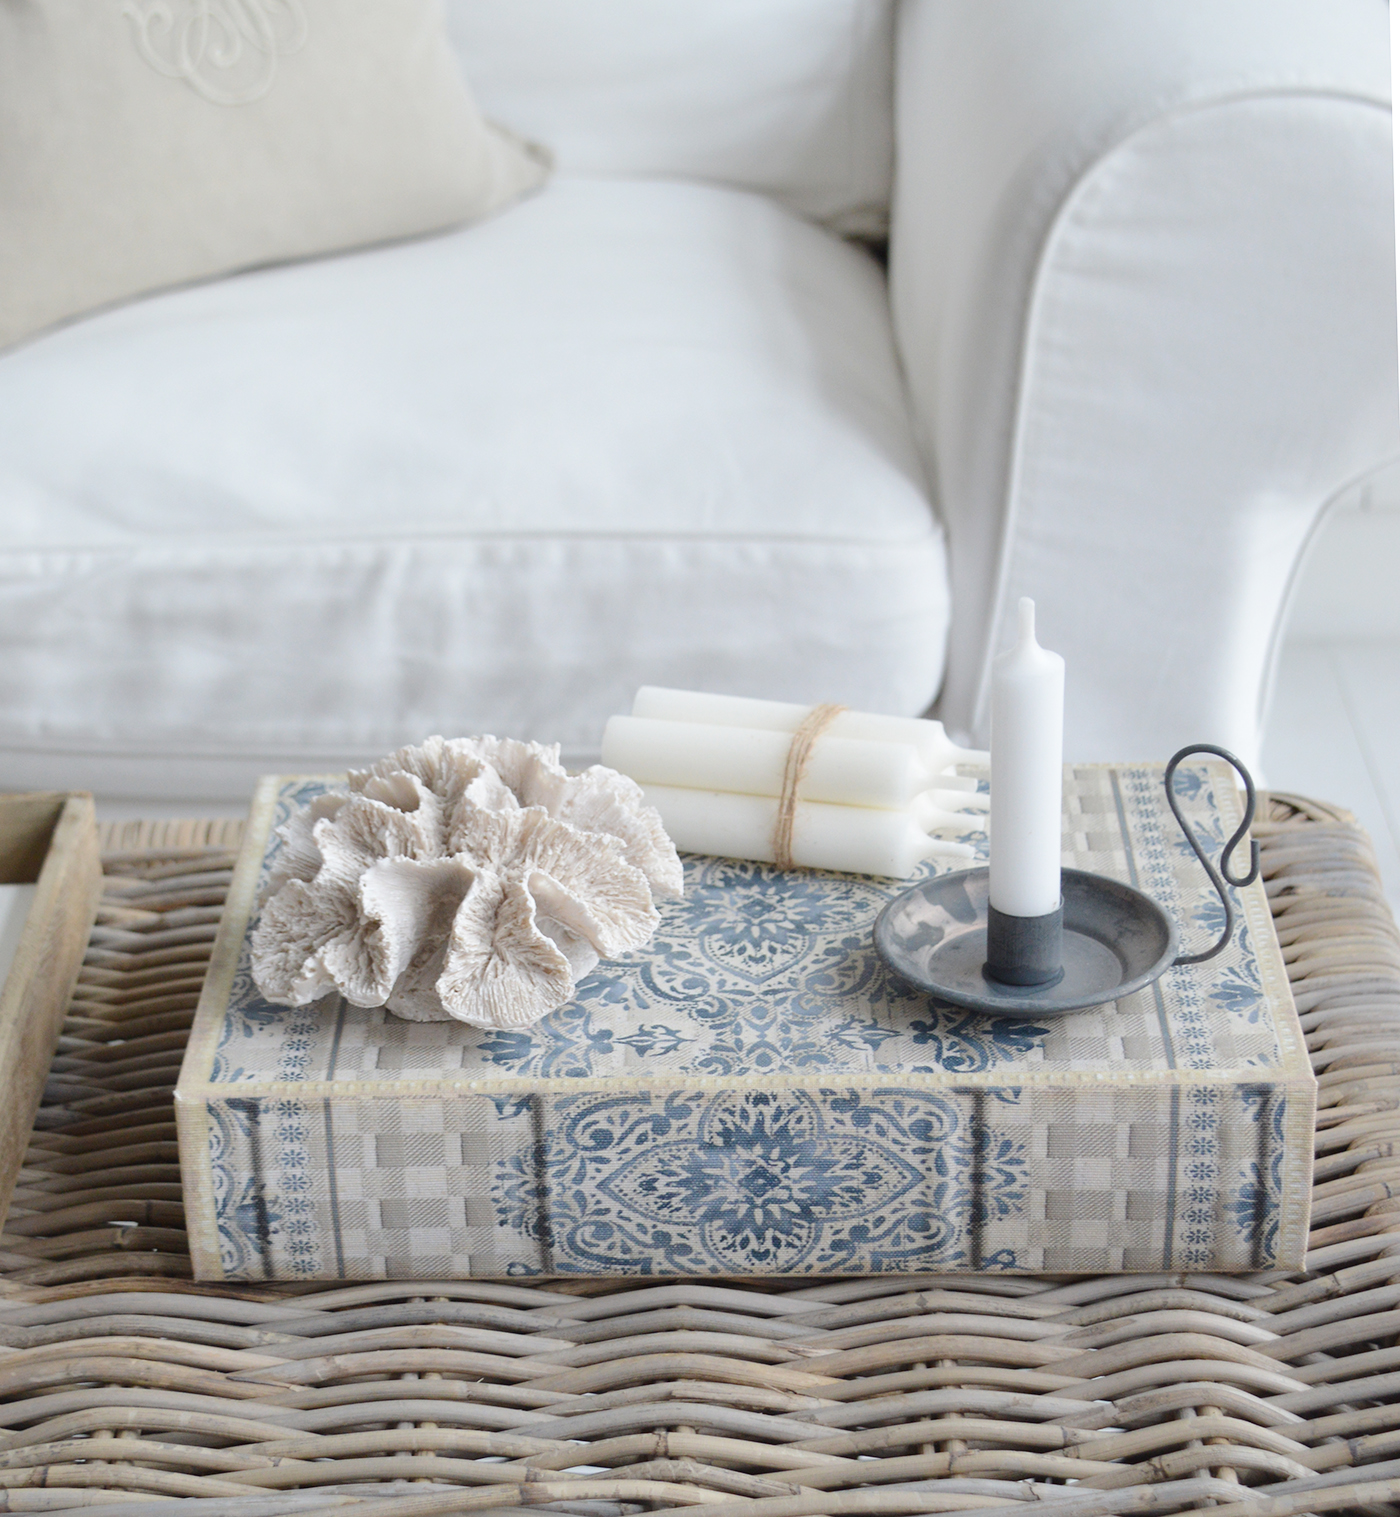 New England home accessories and decor for coastal , country and modern famhouse